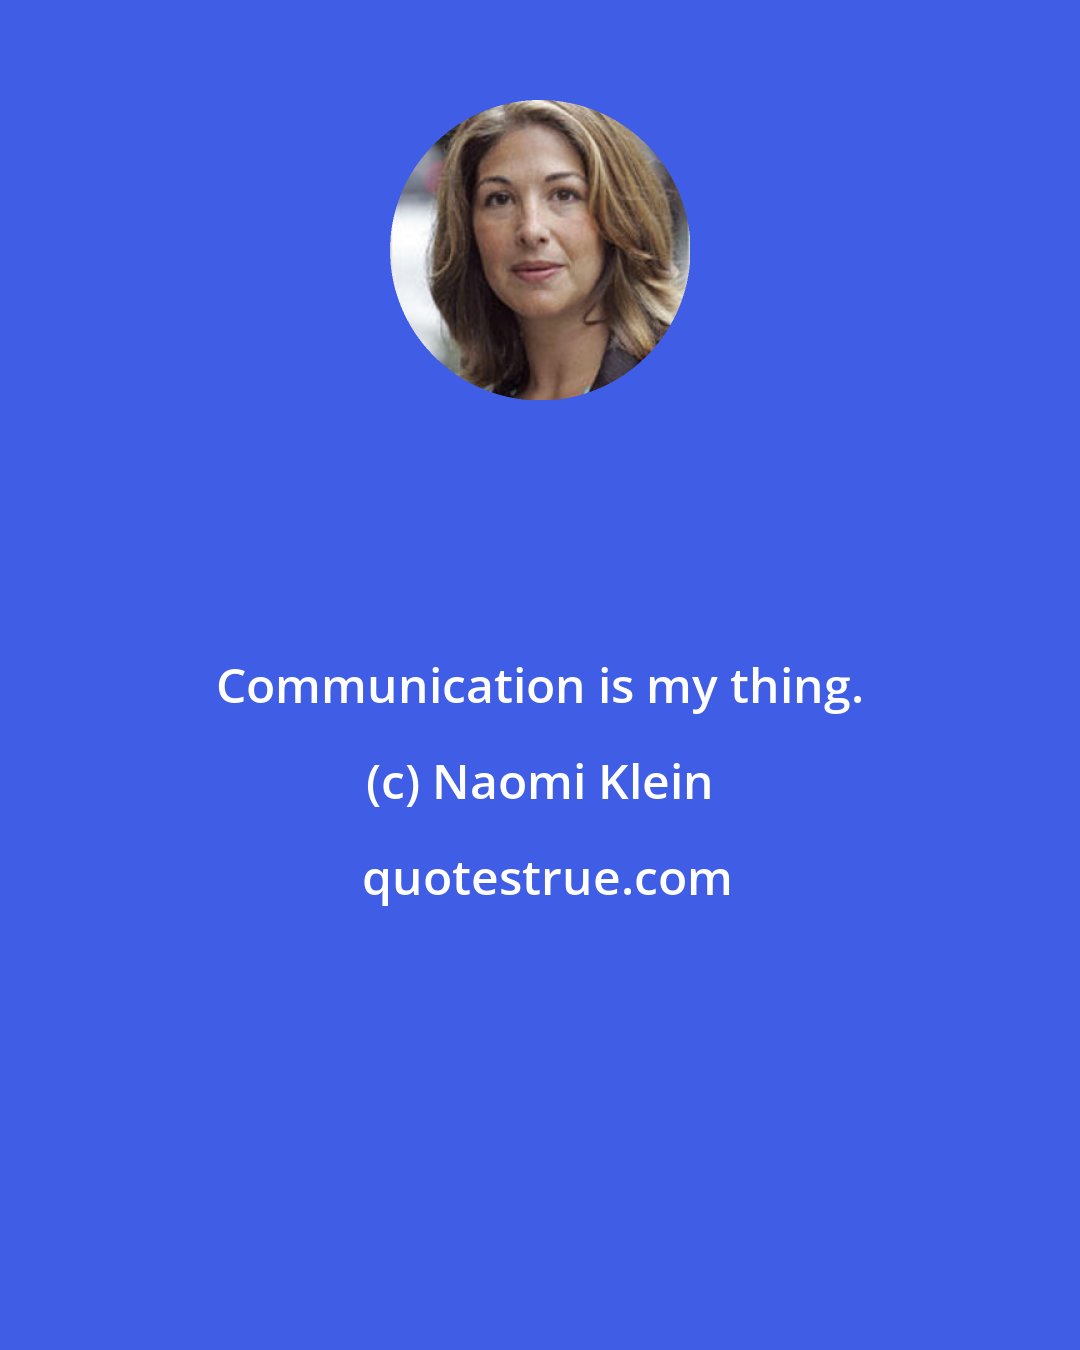 Naomi Klein: Communication is my thing.